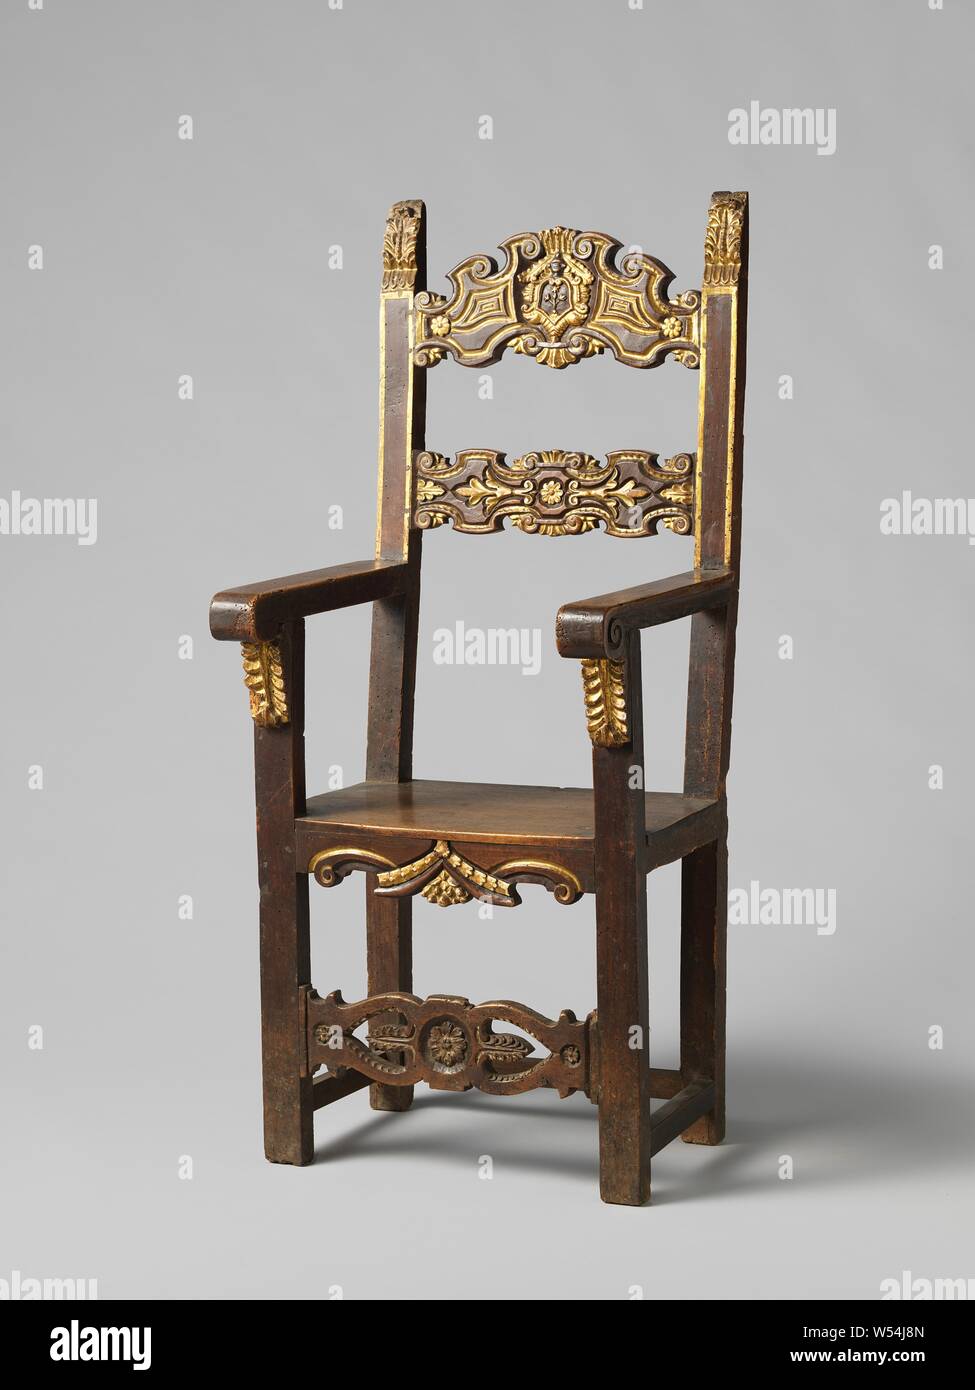 Armchair, Armchair made of walnut, partly gilt. The front legs end up as struts, which are adorned with leaf brackets at the top, and which support the armrests, ending in volutes. The sawn-out front apron, front line and back sports are decorated with, among other things, inserted leaf motifs, rosettes and volutes. The back styles, crowned with leaf motifs, lean backwards. The upper sport of the back carries a coat of arms with flowers, bullets and a star. The legs are square., anonymous, Italy, 1500 - 1600, wood (plant material), walnut (hardwood), gilding (material), gilding, h 140 cm × w Stock Photo